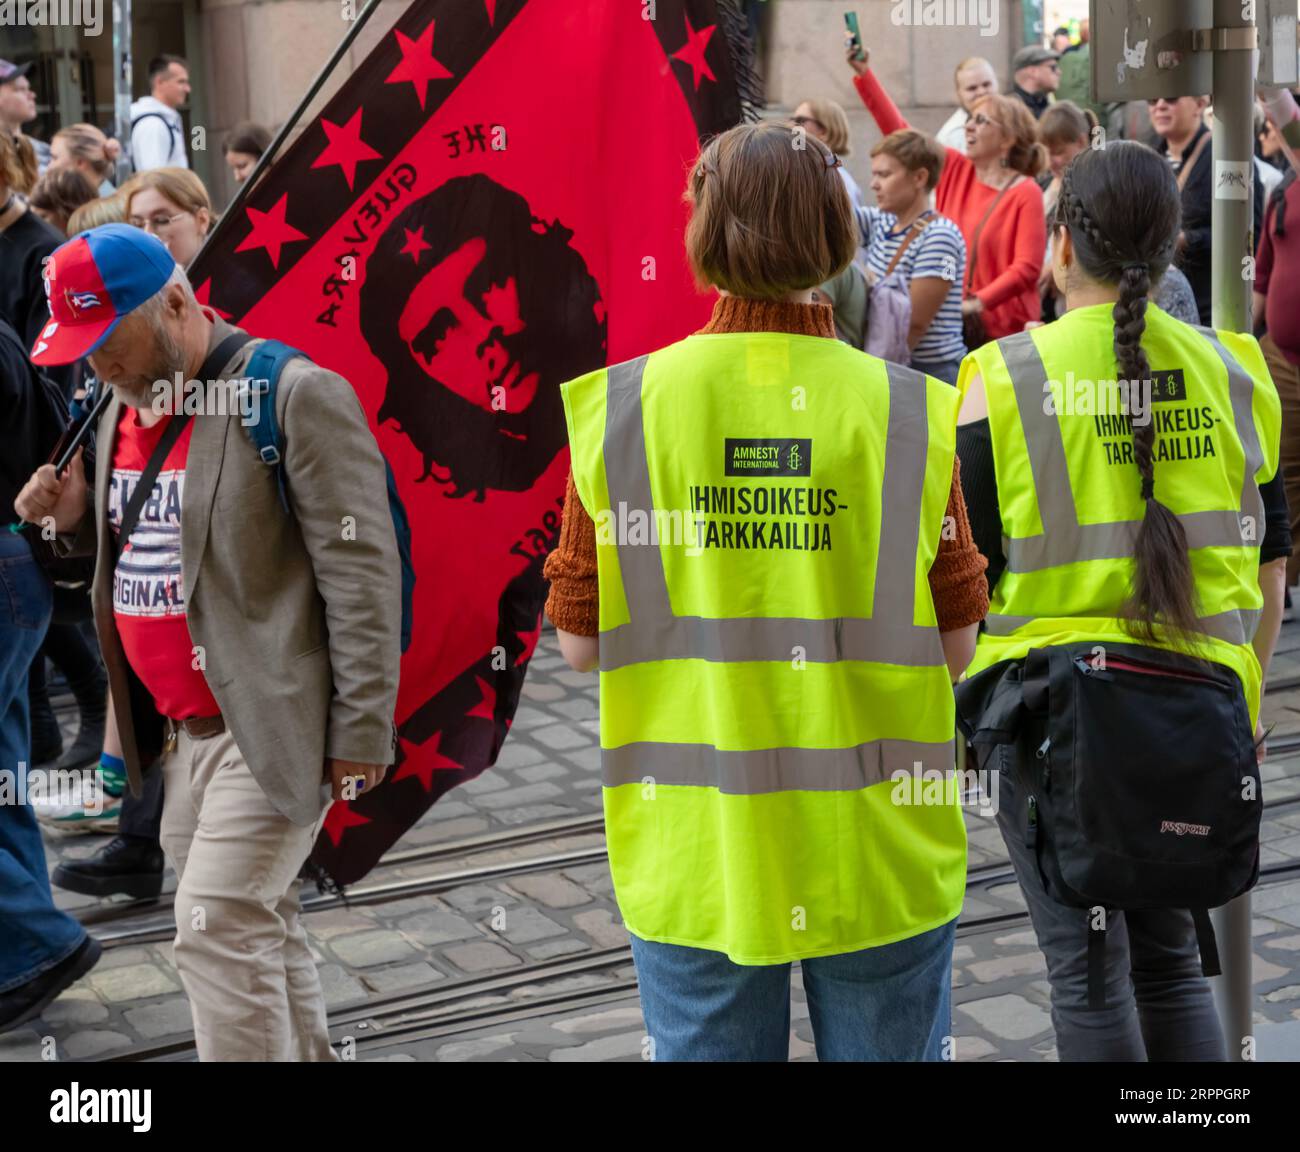 Amnesty International human rights observers overlooking the ’End the silence!’ demonstration against racism and fascism in the Finnish government. Stock Photo